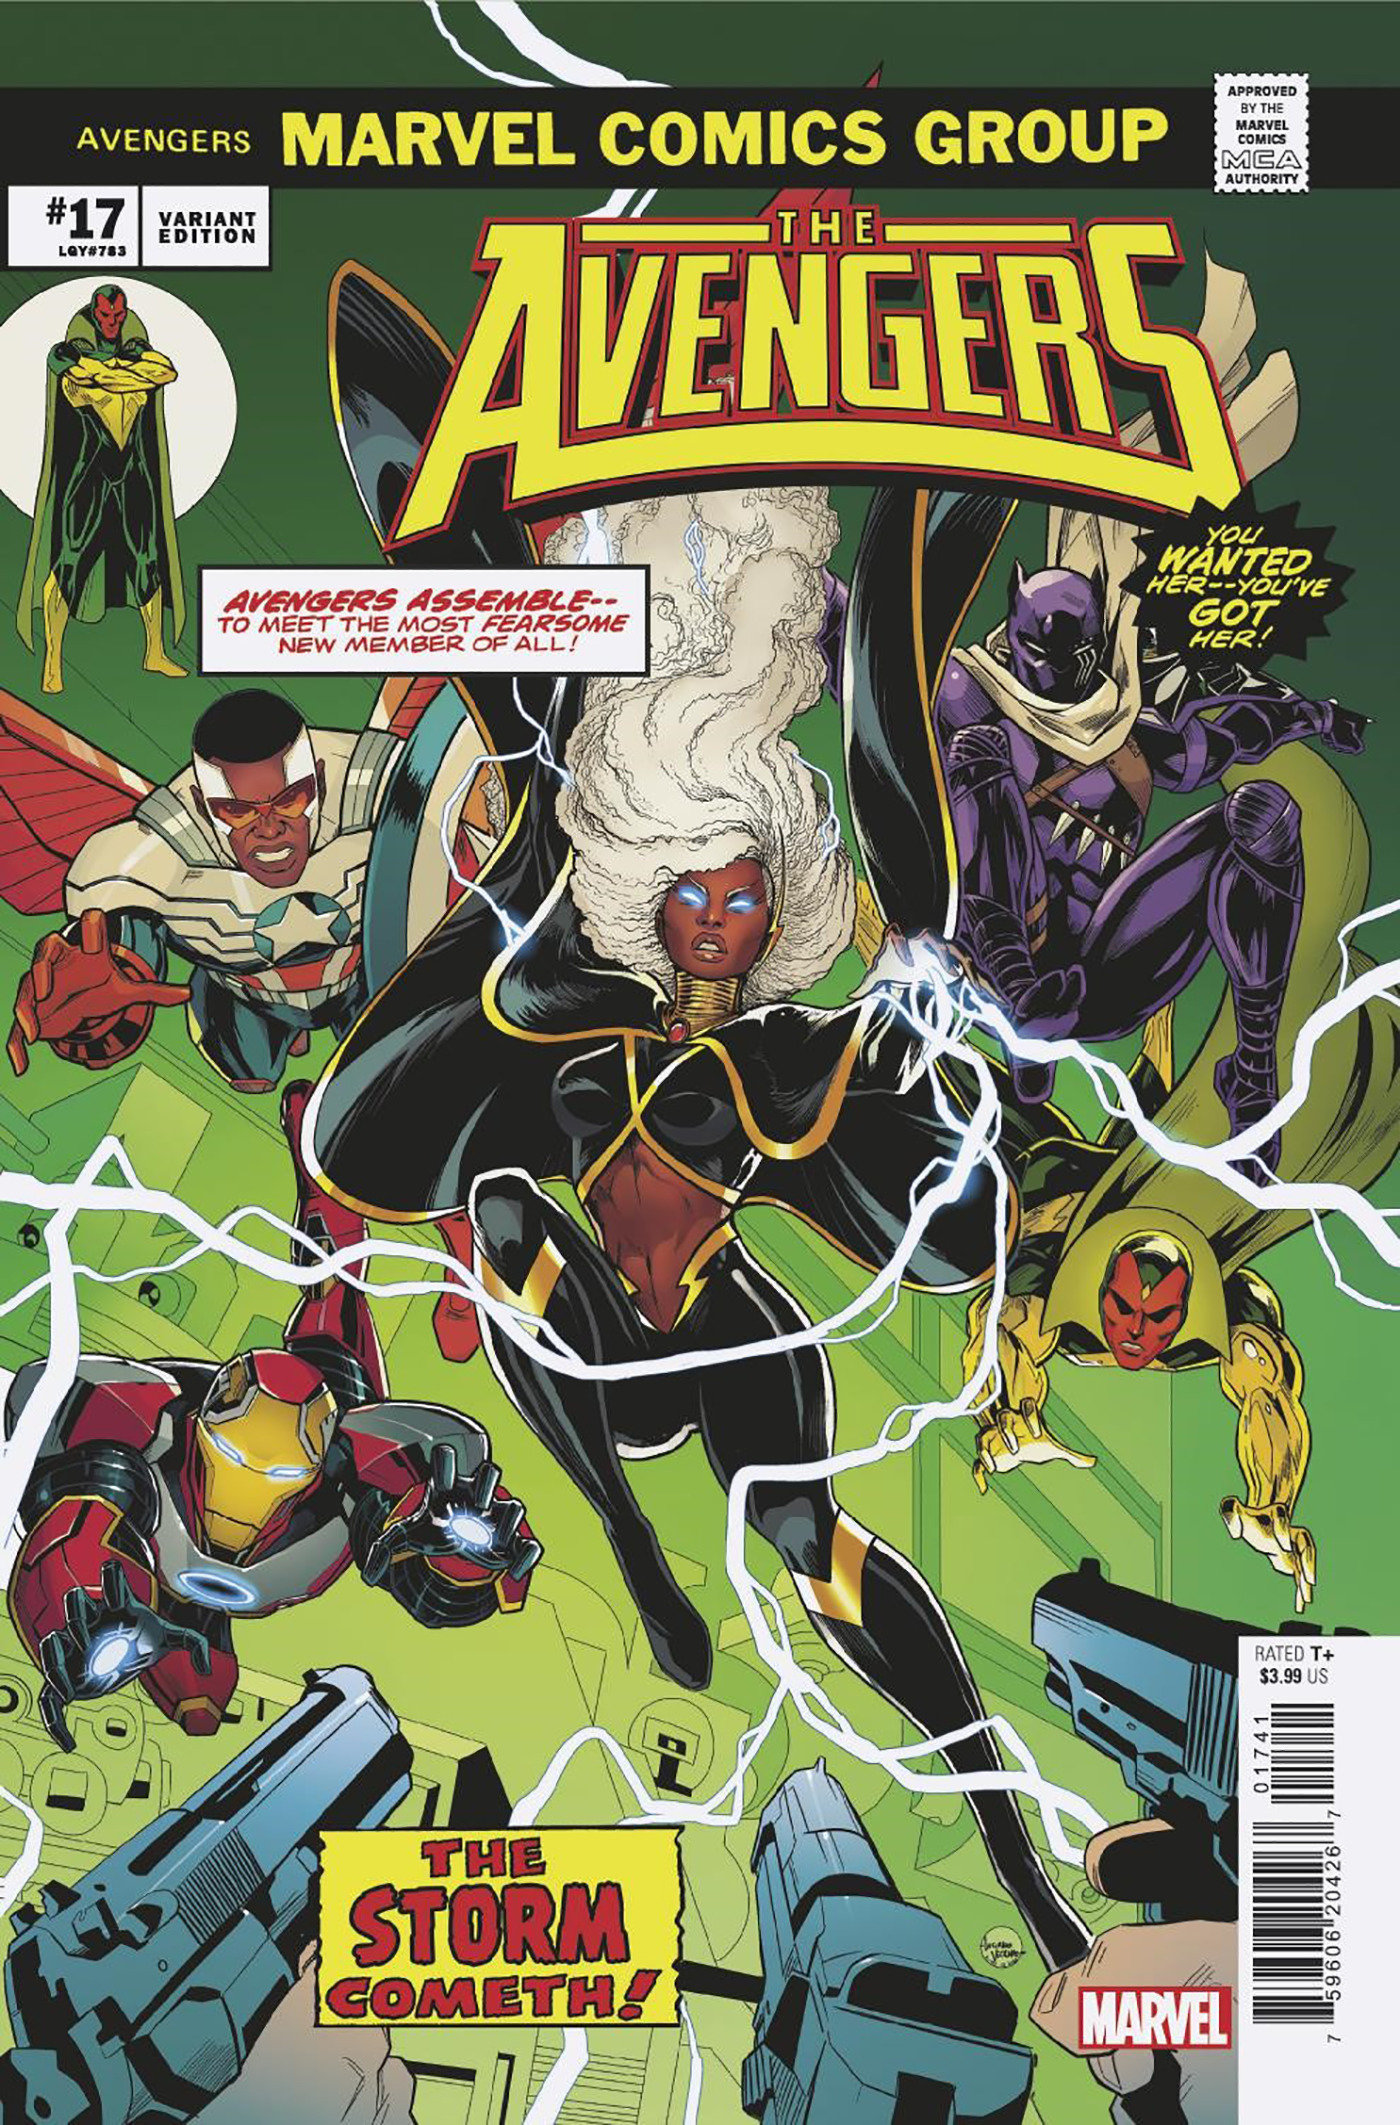 Avengers #17 Luciano Vecchio Homage Variant (Deadpool/Wolverine: Weapon X-Traction)